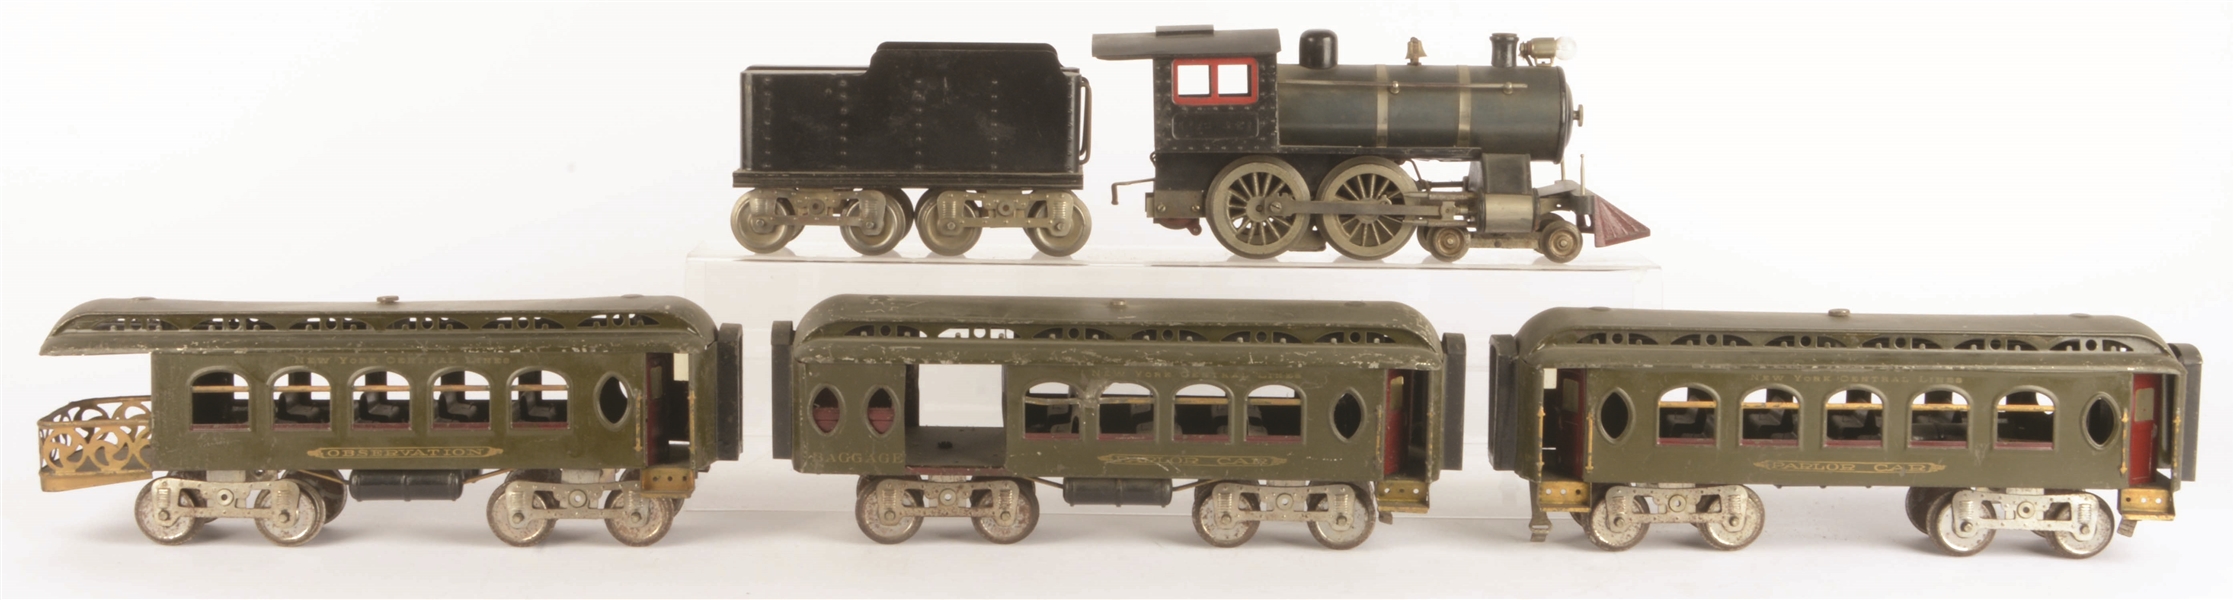 LIONEL NO. 6 WITH THREE PASSENGER CARS.